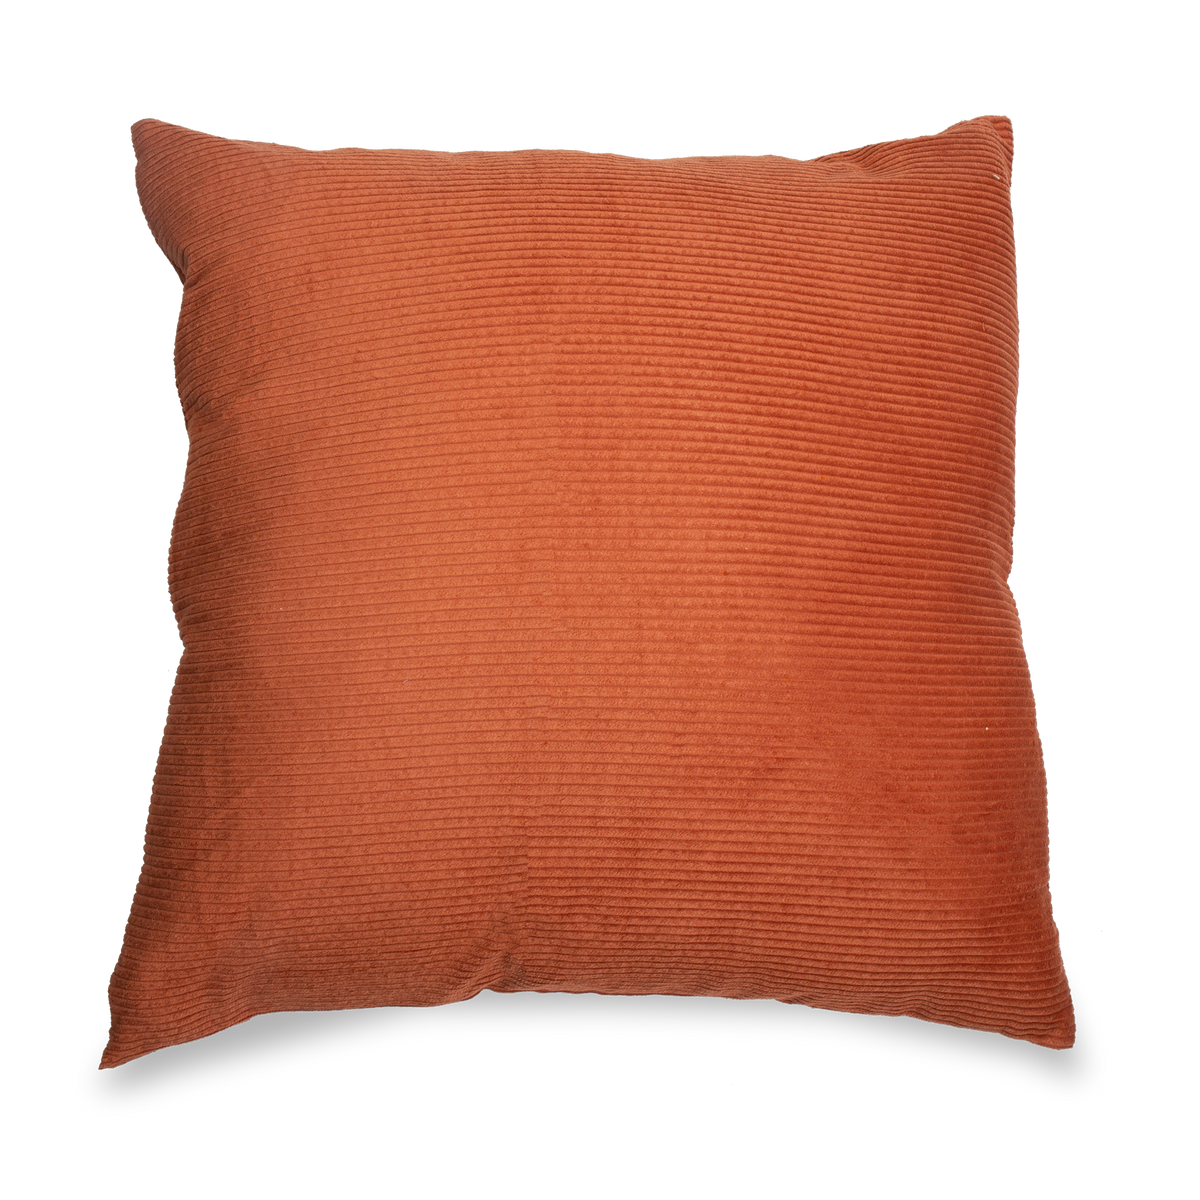 The Corduroy Pillow in orange is texturally significant.